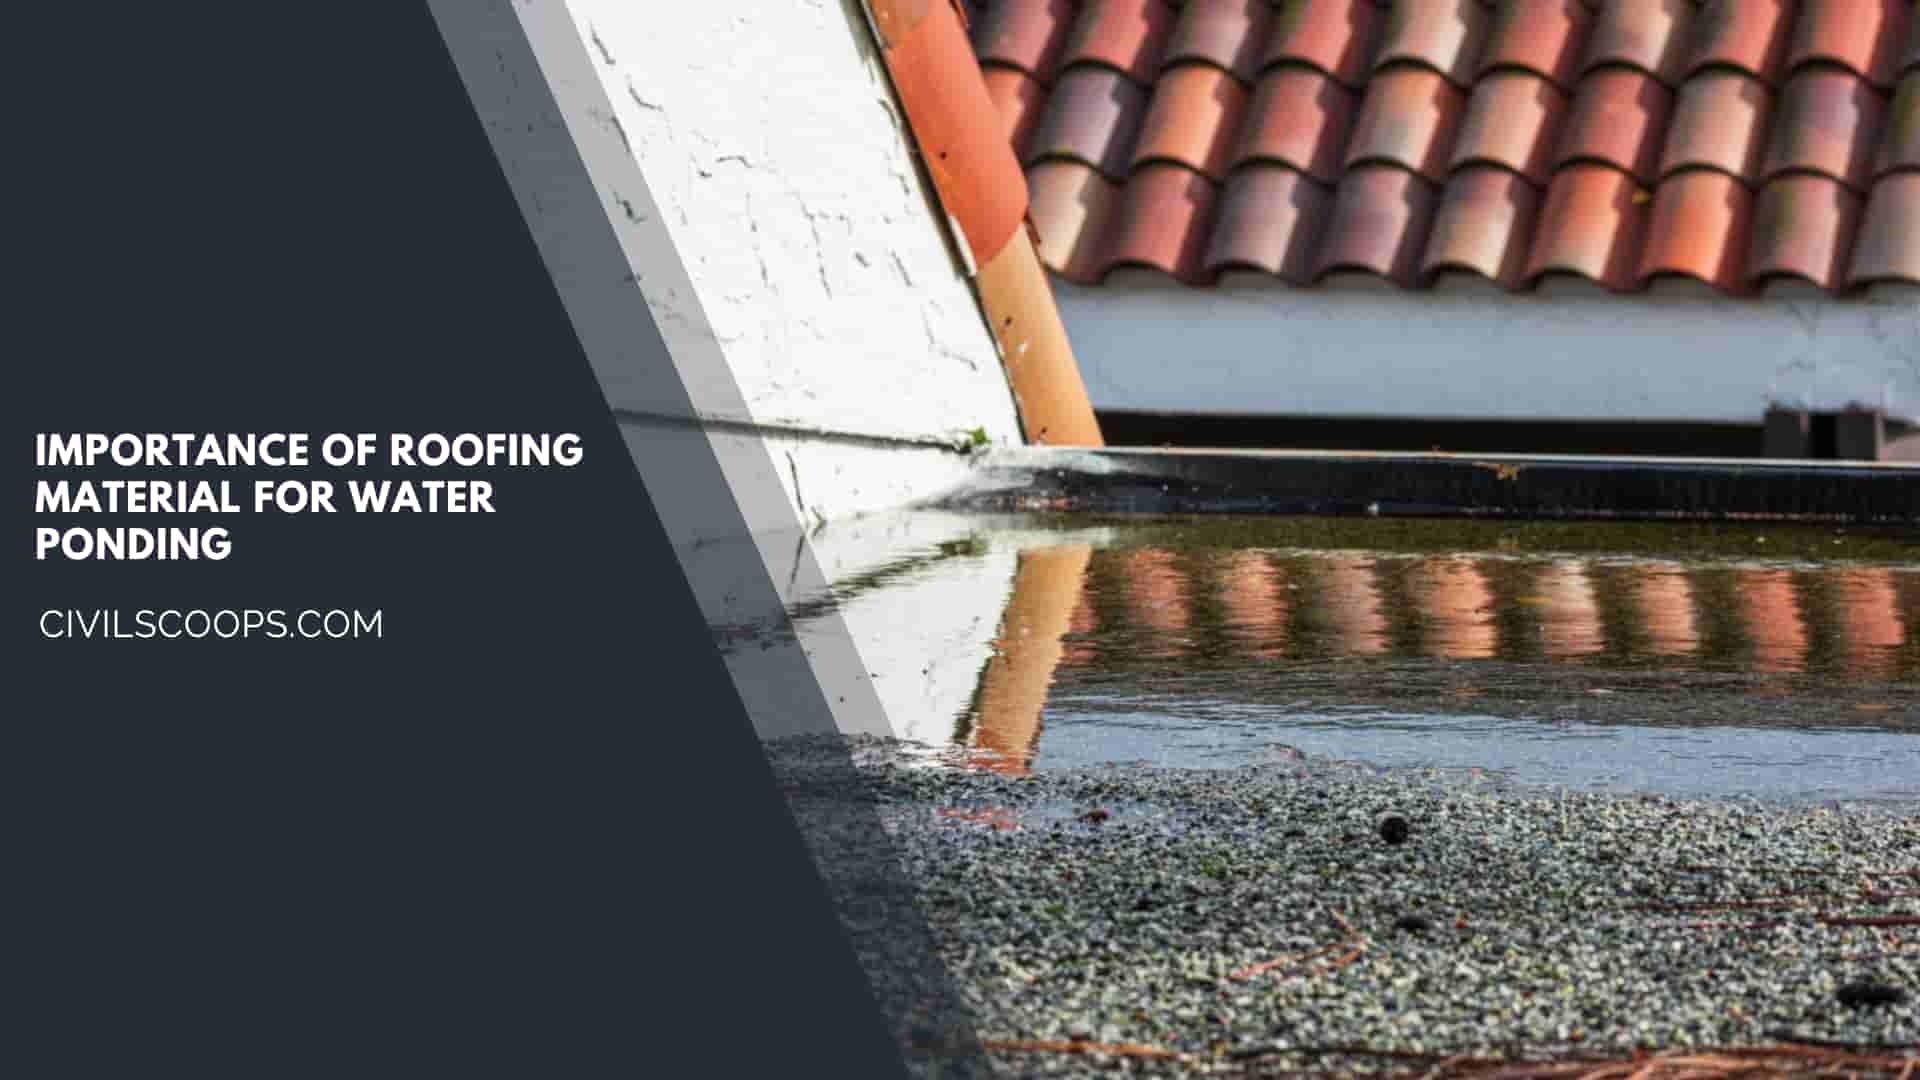 Importance of Roofing Material For Water Ponding